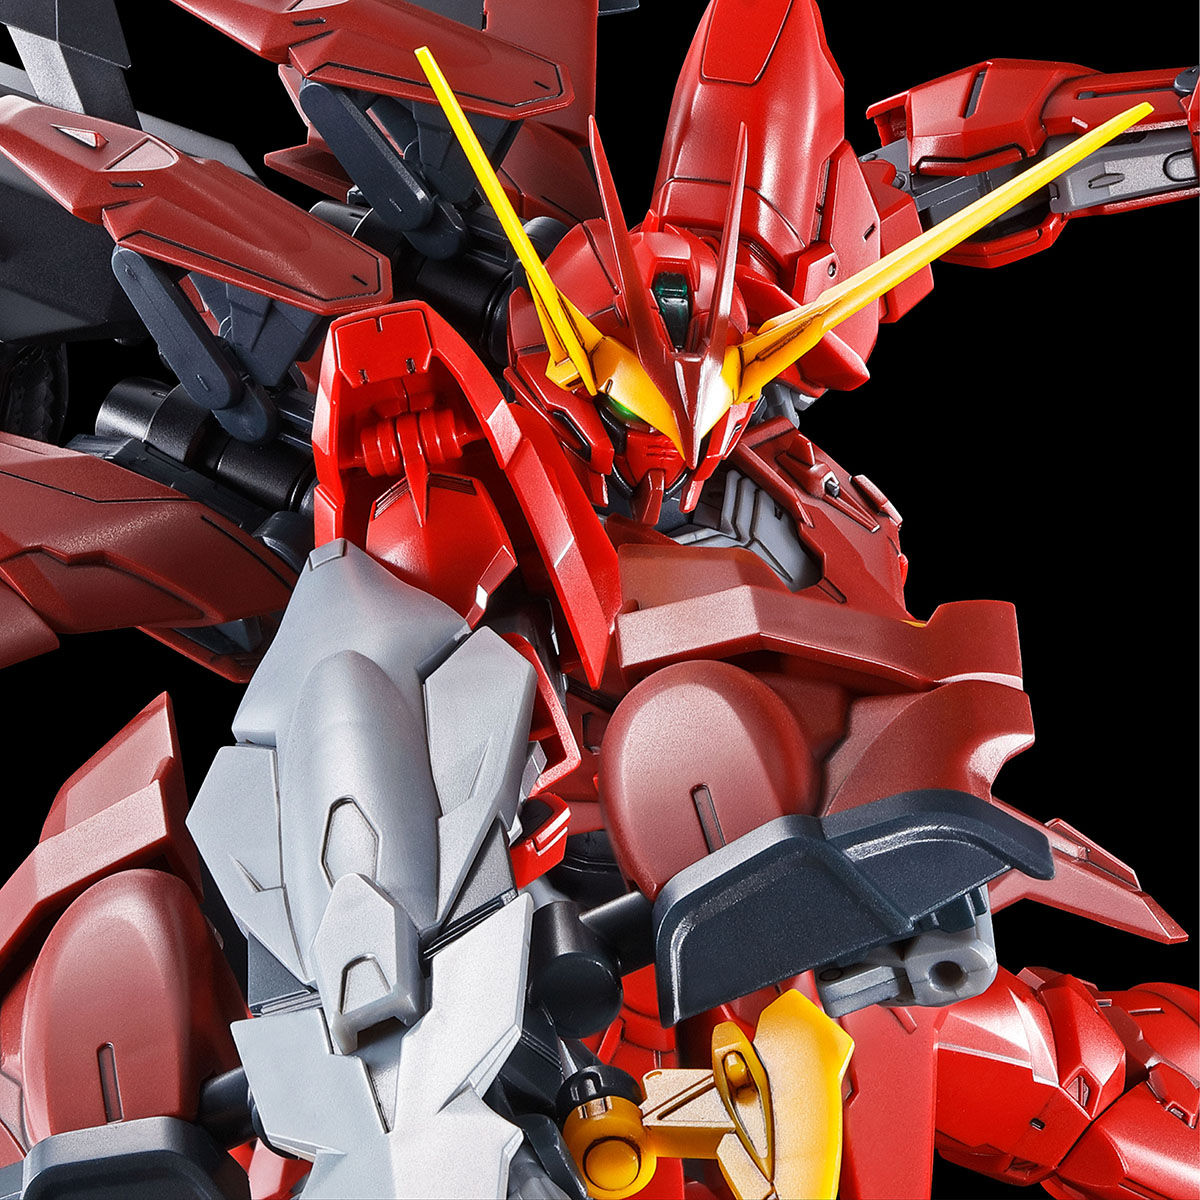 Mg 1 100 Testament Gundam Jan 2021 Delivery Gundam Premium Bandai Singapore Online Store For Action Figures Model Kits Toys And More